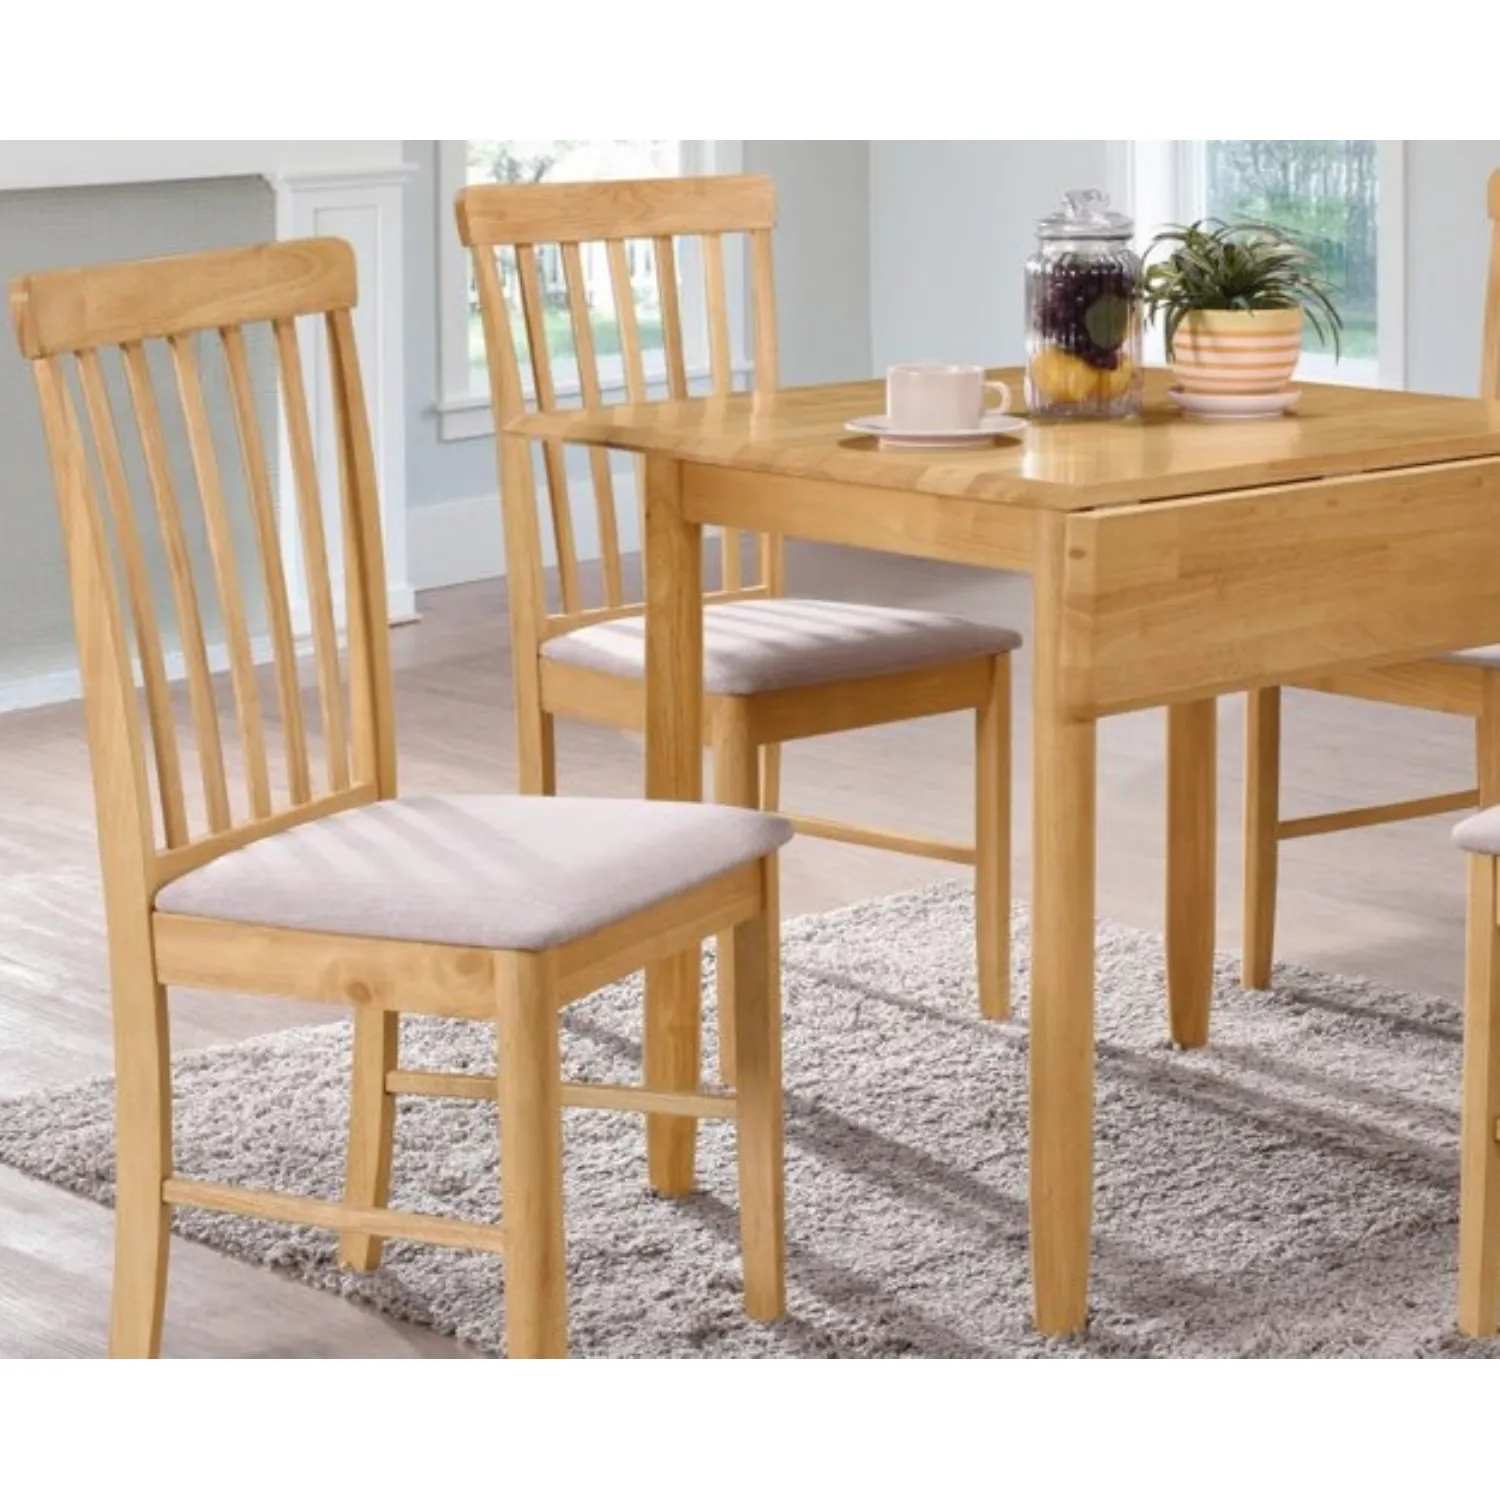 Light Solid Hardwood Square Drop Leaf Dining Table and 2 Chairs